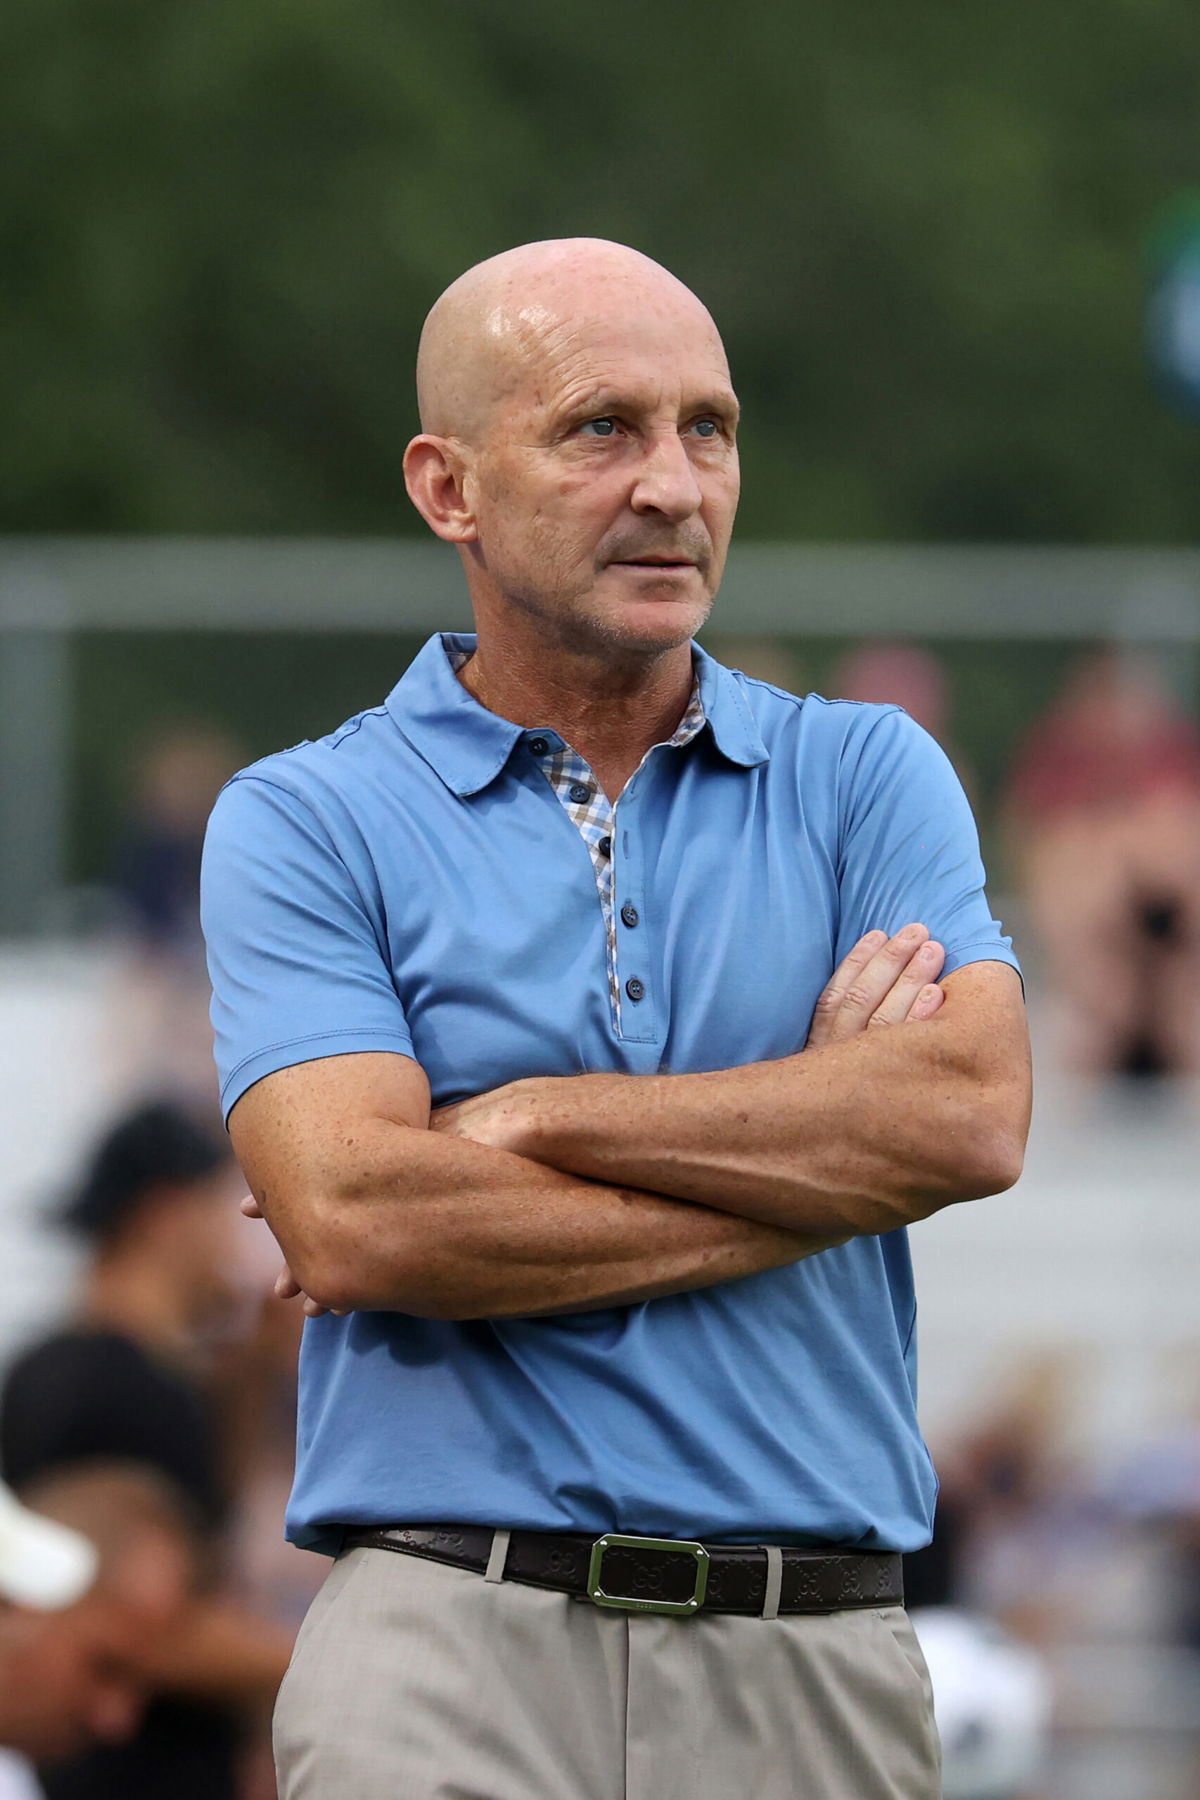 <i>Andy Mead/ISI Photos/Getty Images North America/Getty Images</i><br/>Former head coach Paul Riley of the North Carolina Courage denied the sexual misconduct accusations in The Athletic report.